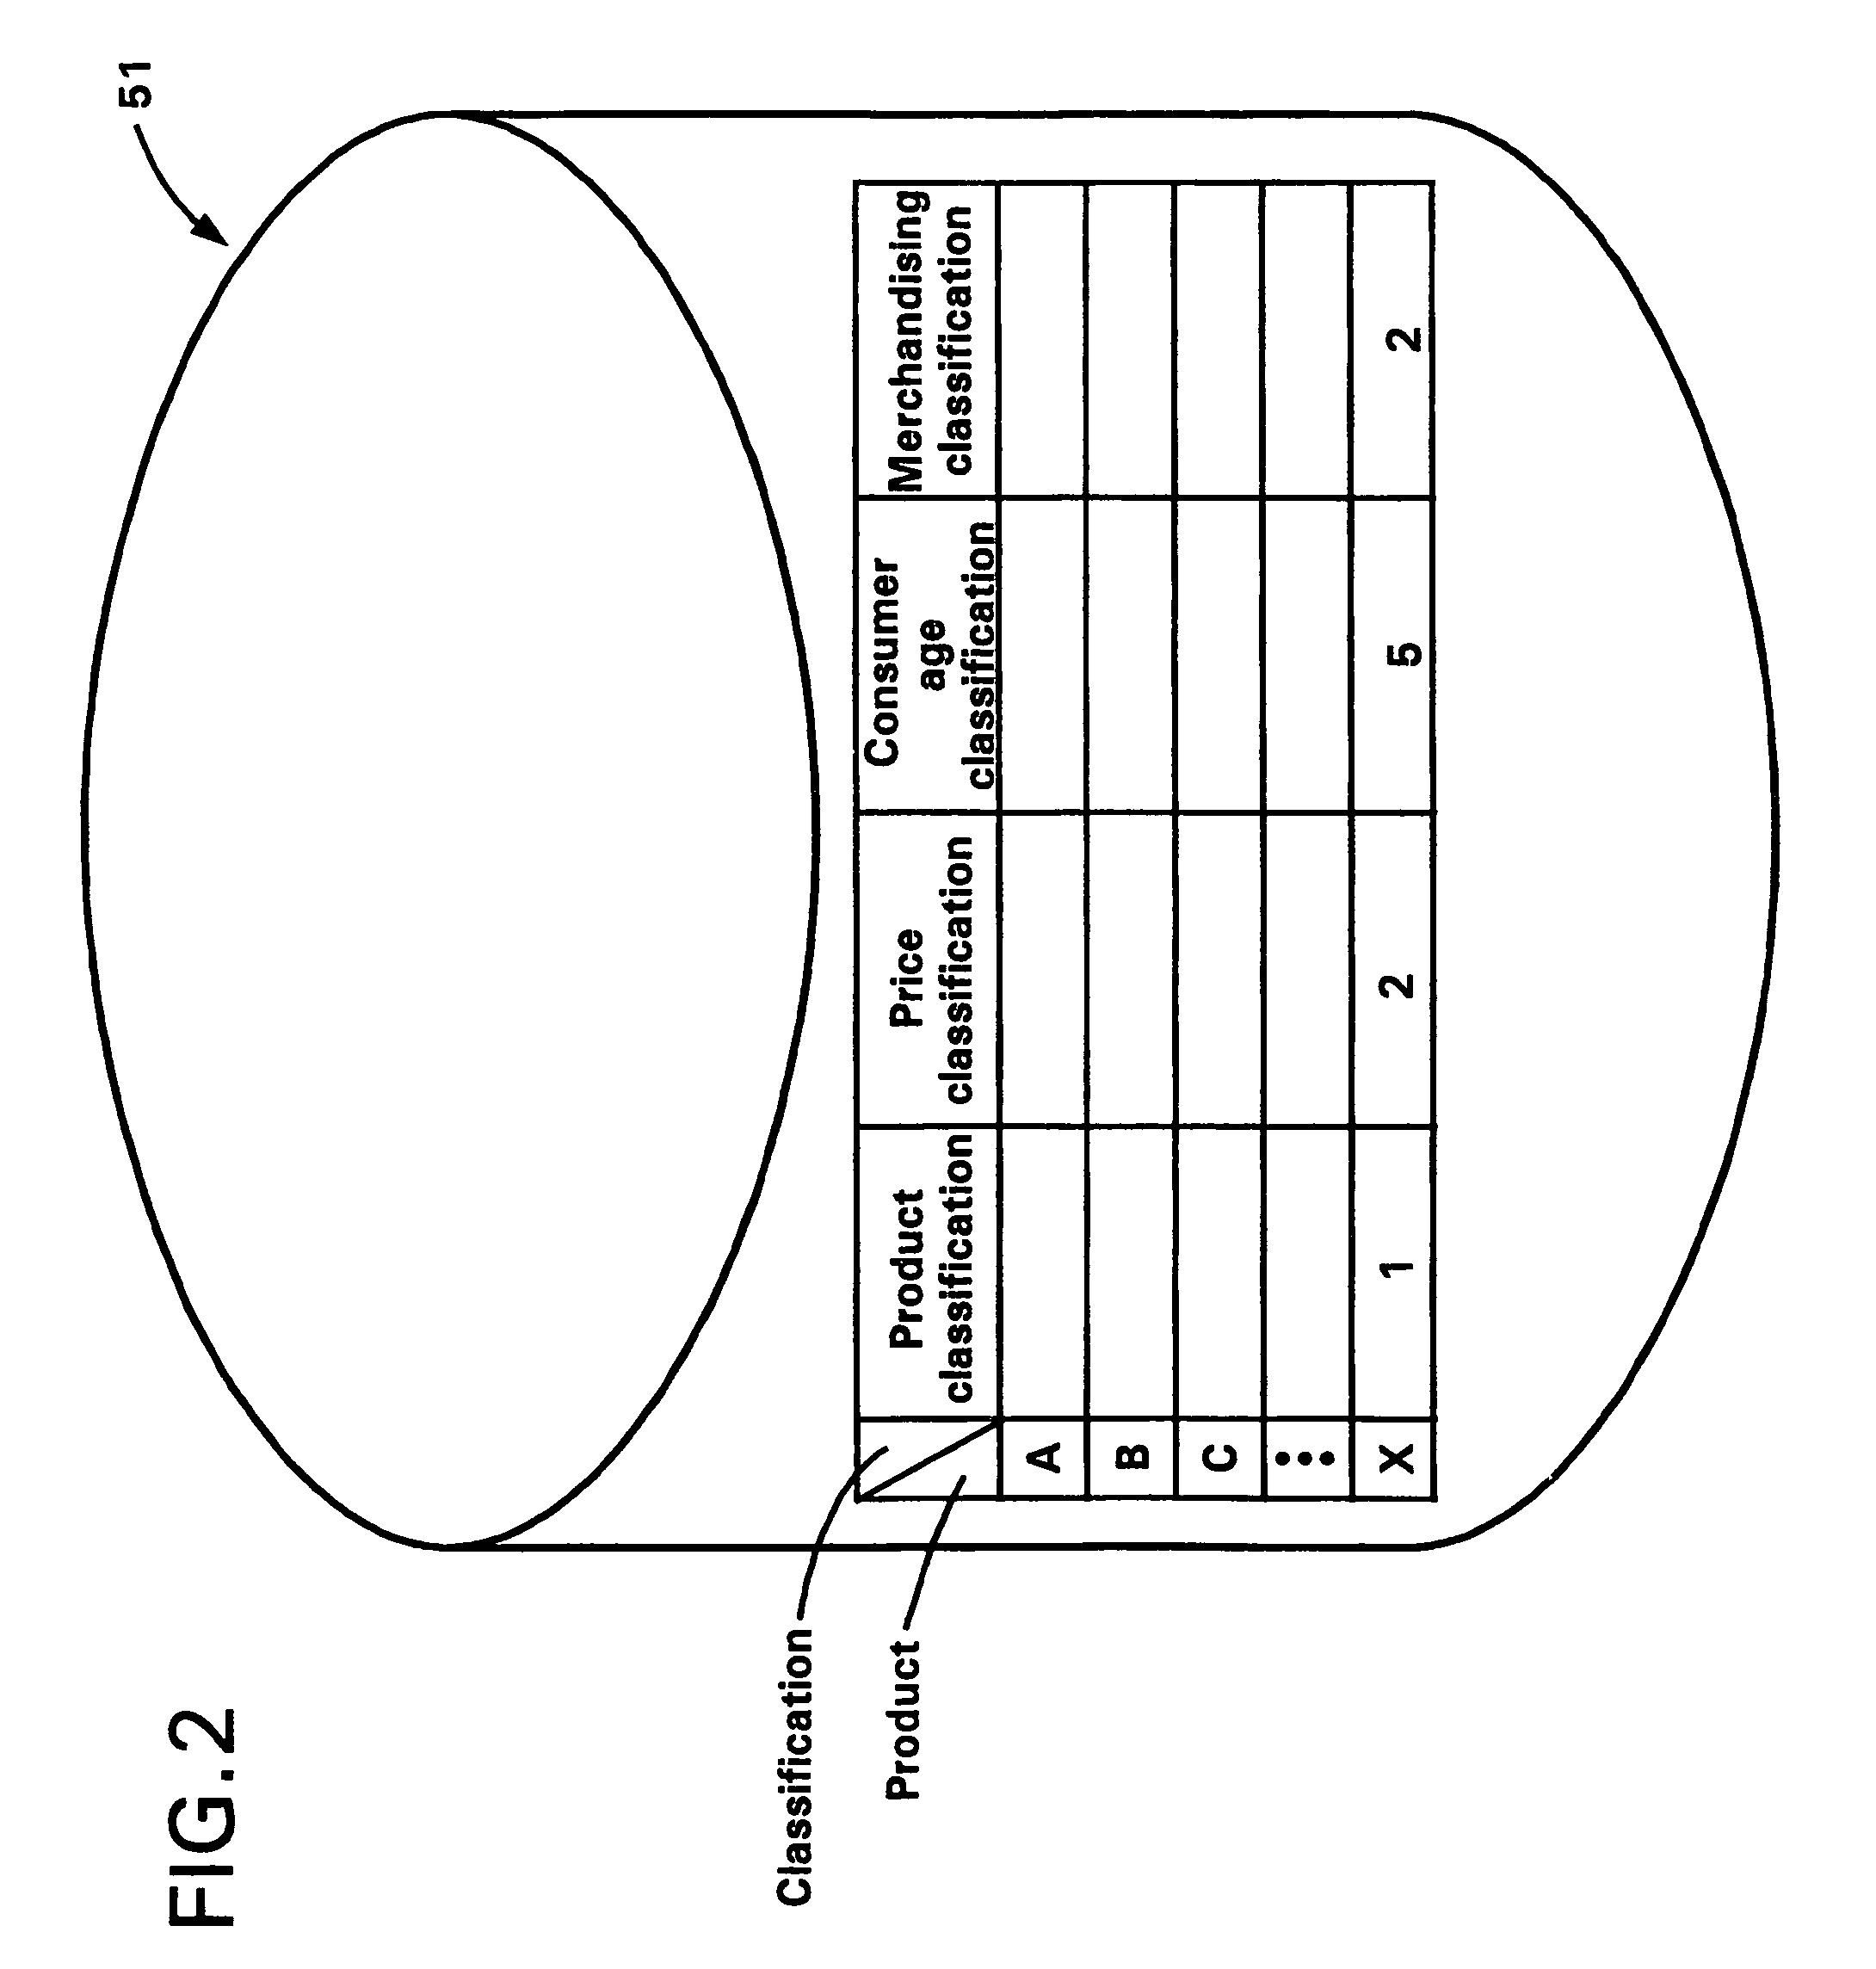 Flexible production and material resource planning system using sales information directly acquired from POS terminals